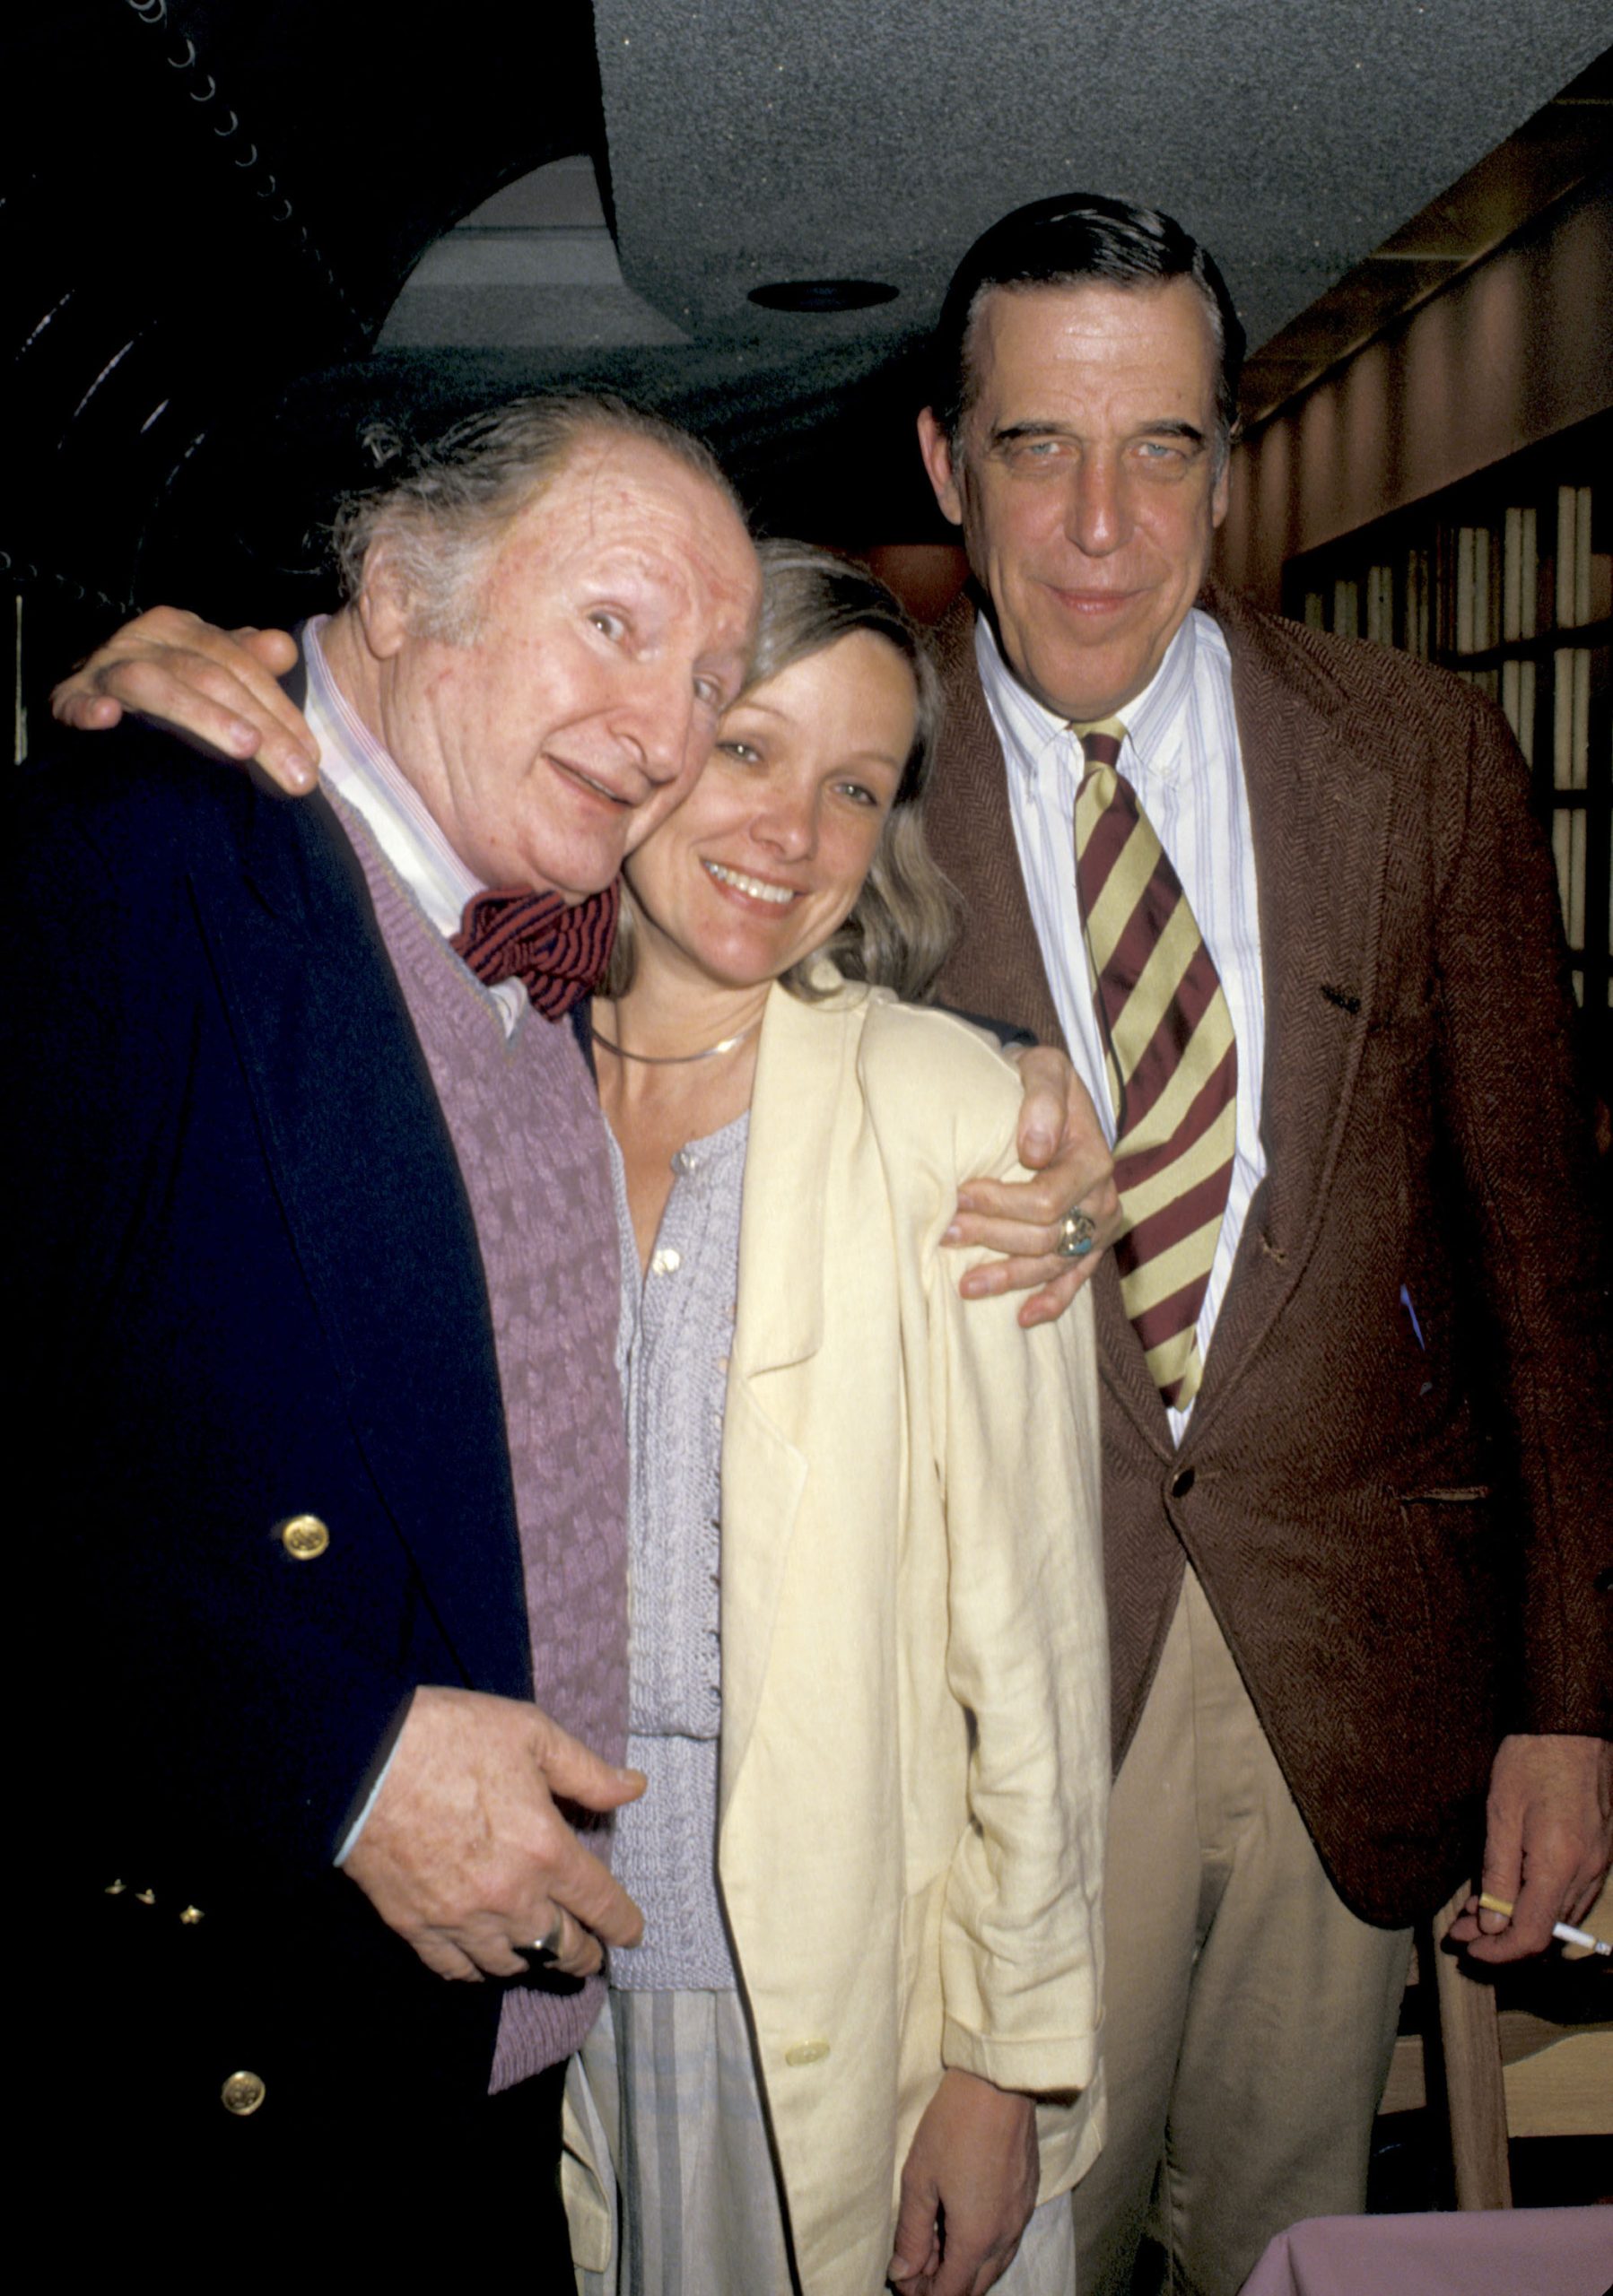 'The Munsters' original 'Marilyn Munster' actor Beverley Owen, center, with 'Grandpa Munster' actor Al Lewis (left) and 'Herman Munster' actor Fred Gwynne in 1987